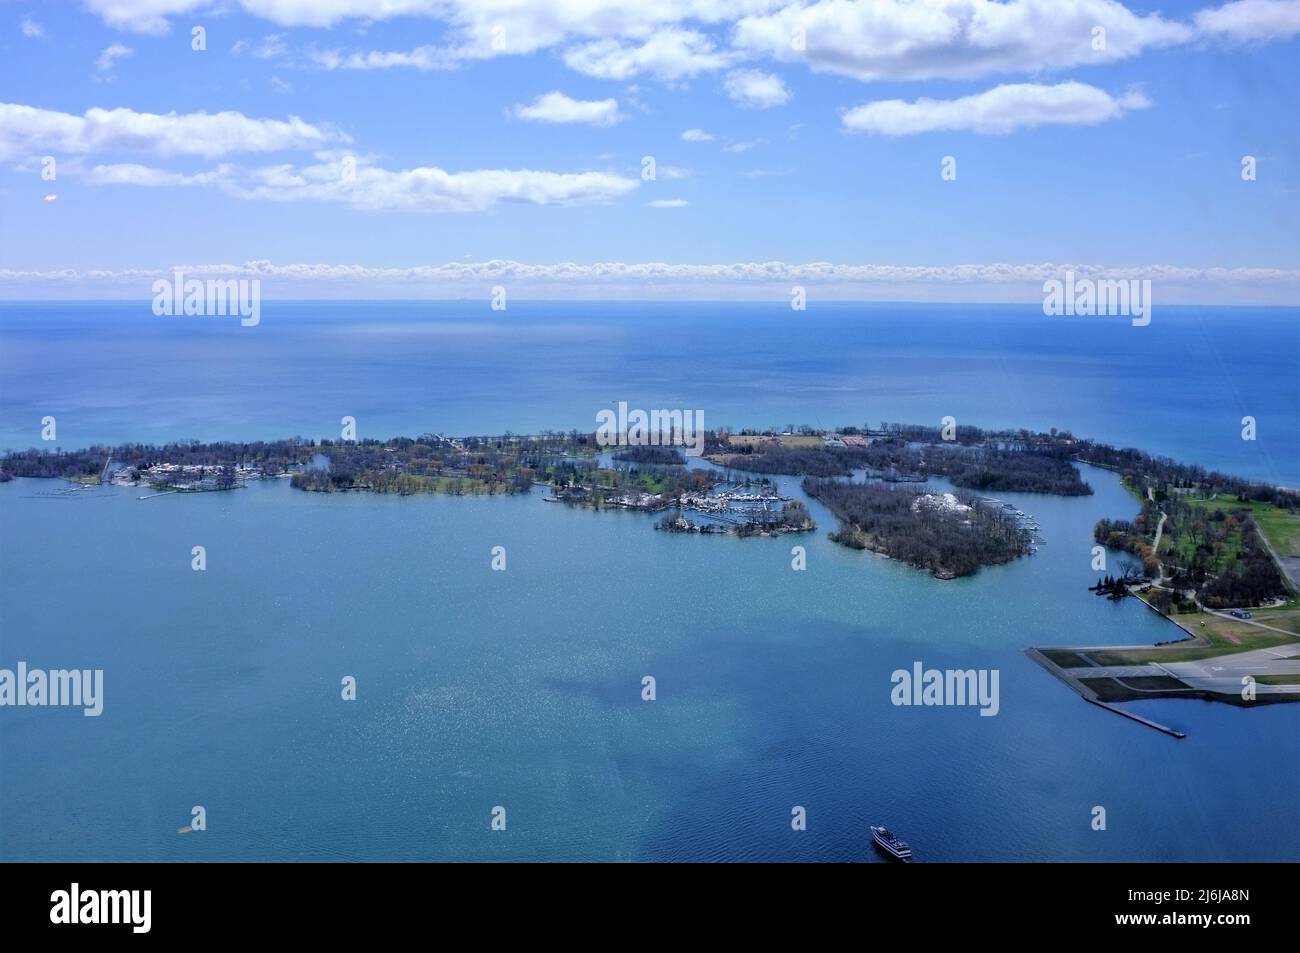 Toronto Island as seen from the top of the CN Tower Stock Photo